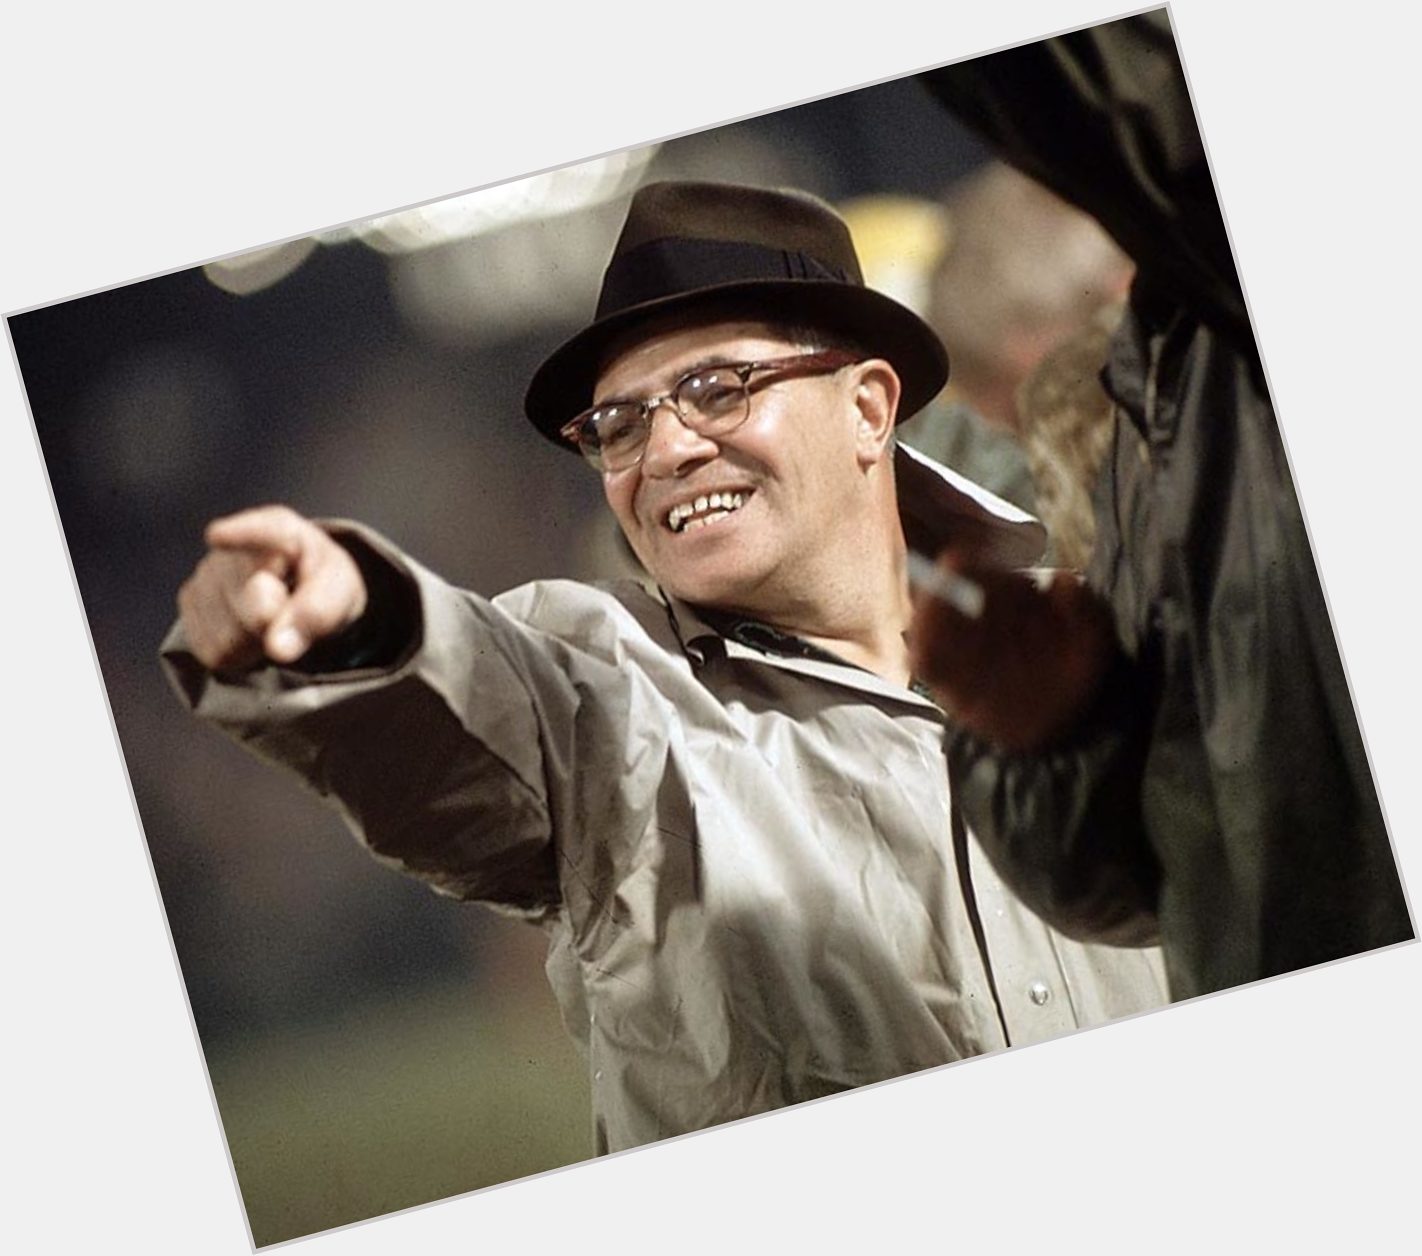 <a href="/hot-men/vince-lombardi/where-dating-news-photos">Vince Lombardi</a>  